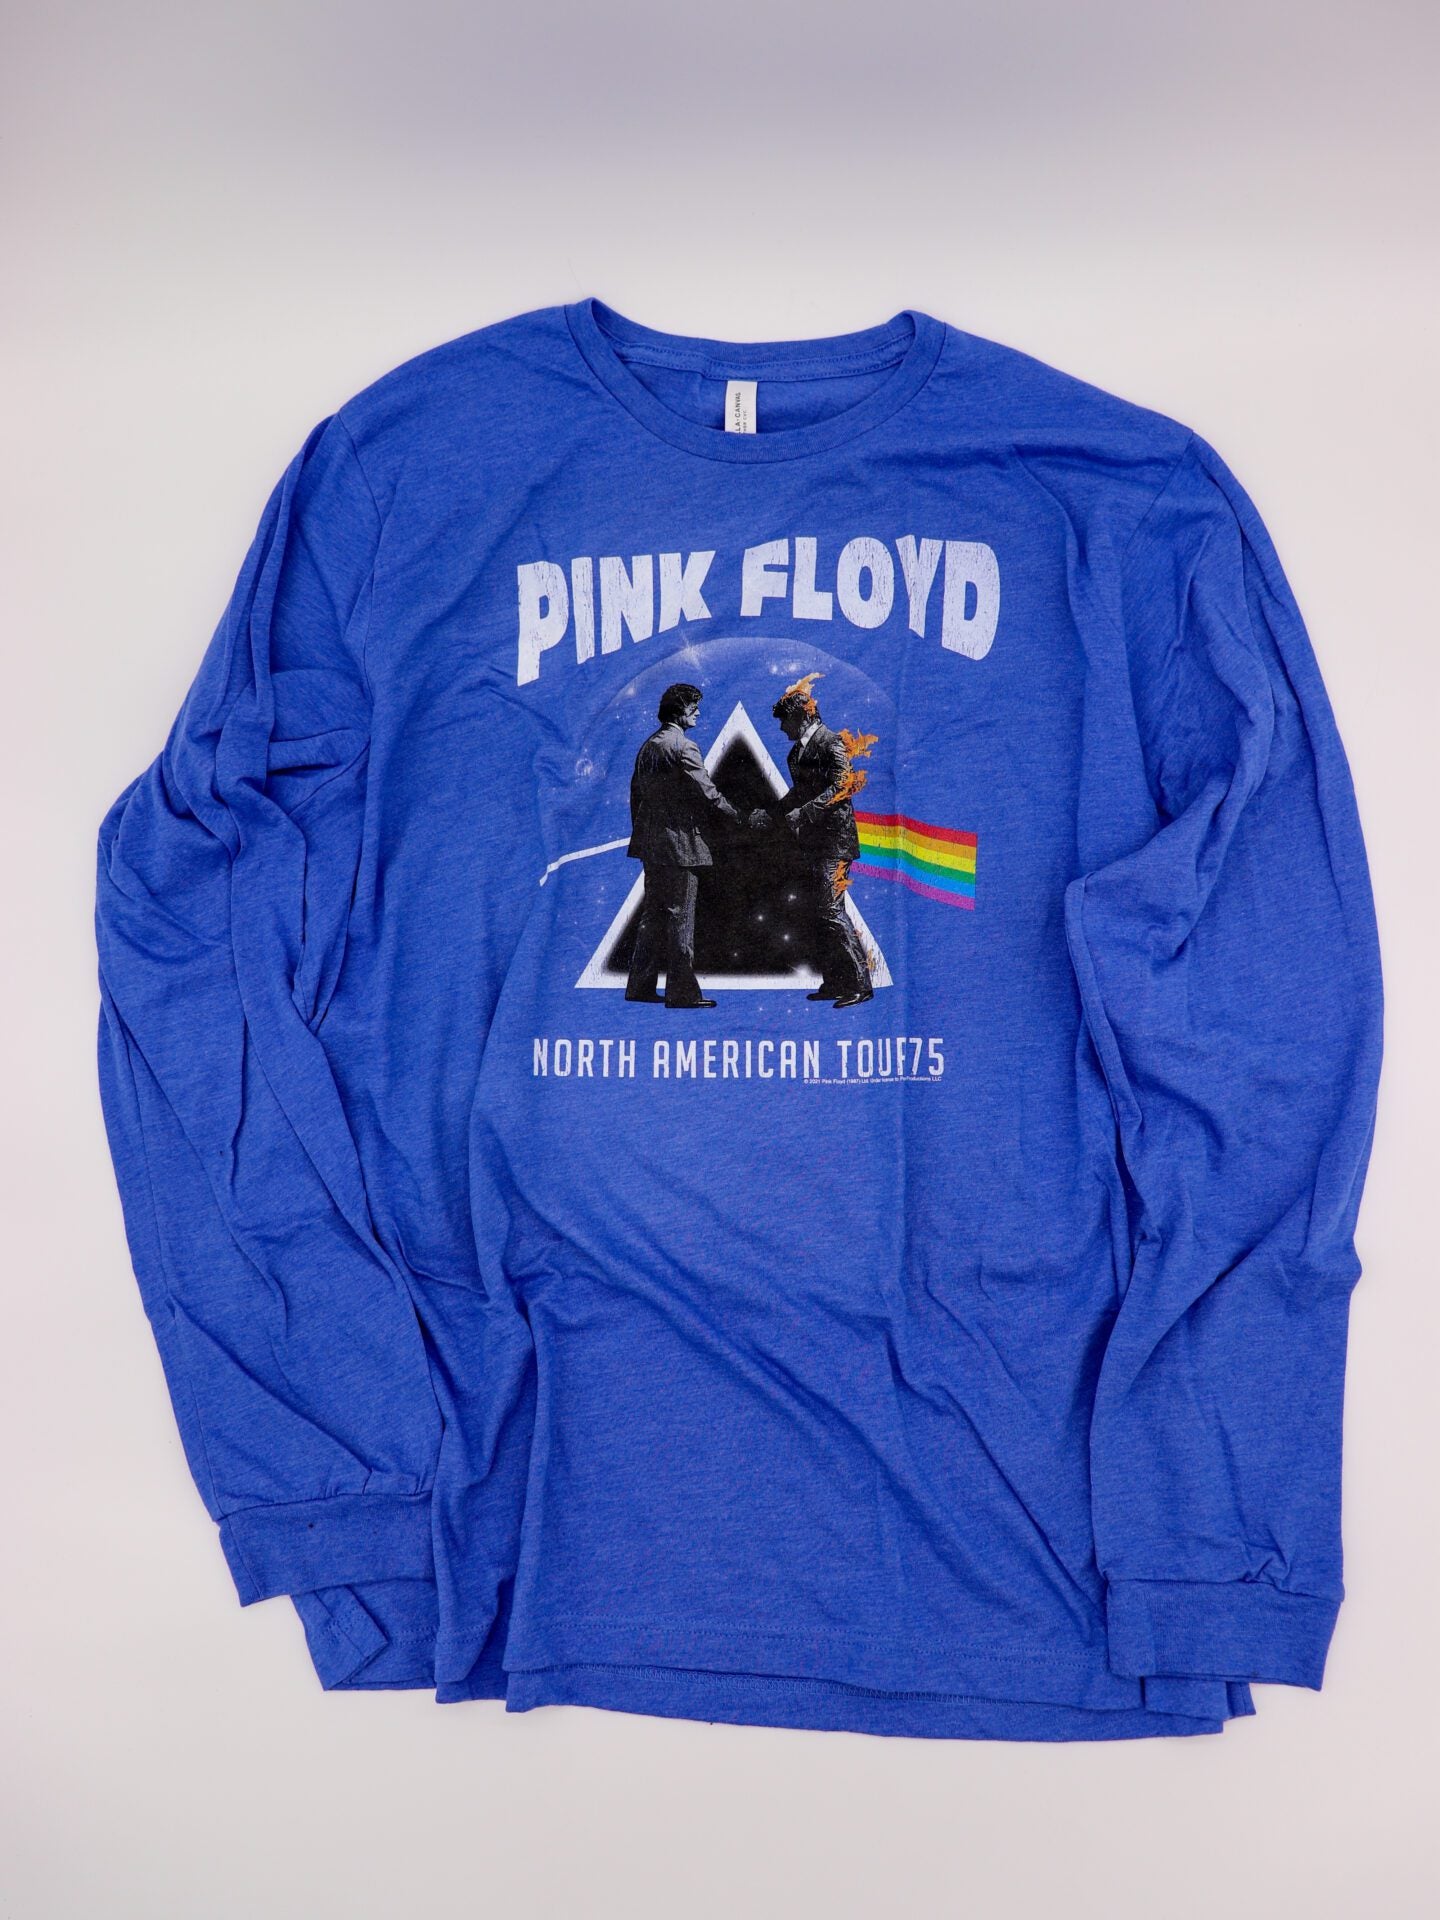 Pink Floyd 1975 North American Tour Long-Sleeve Blue T-Shirt, New, Size XXL